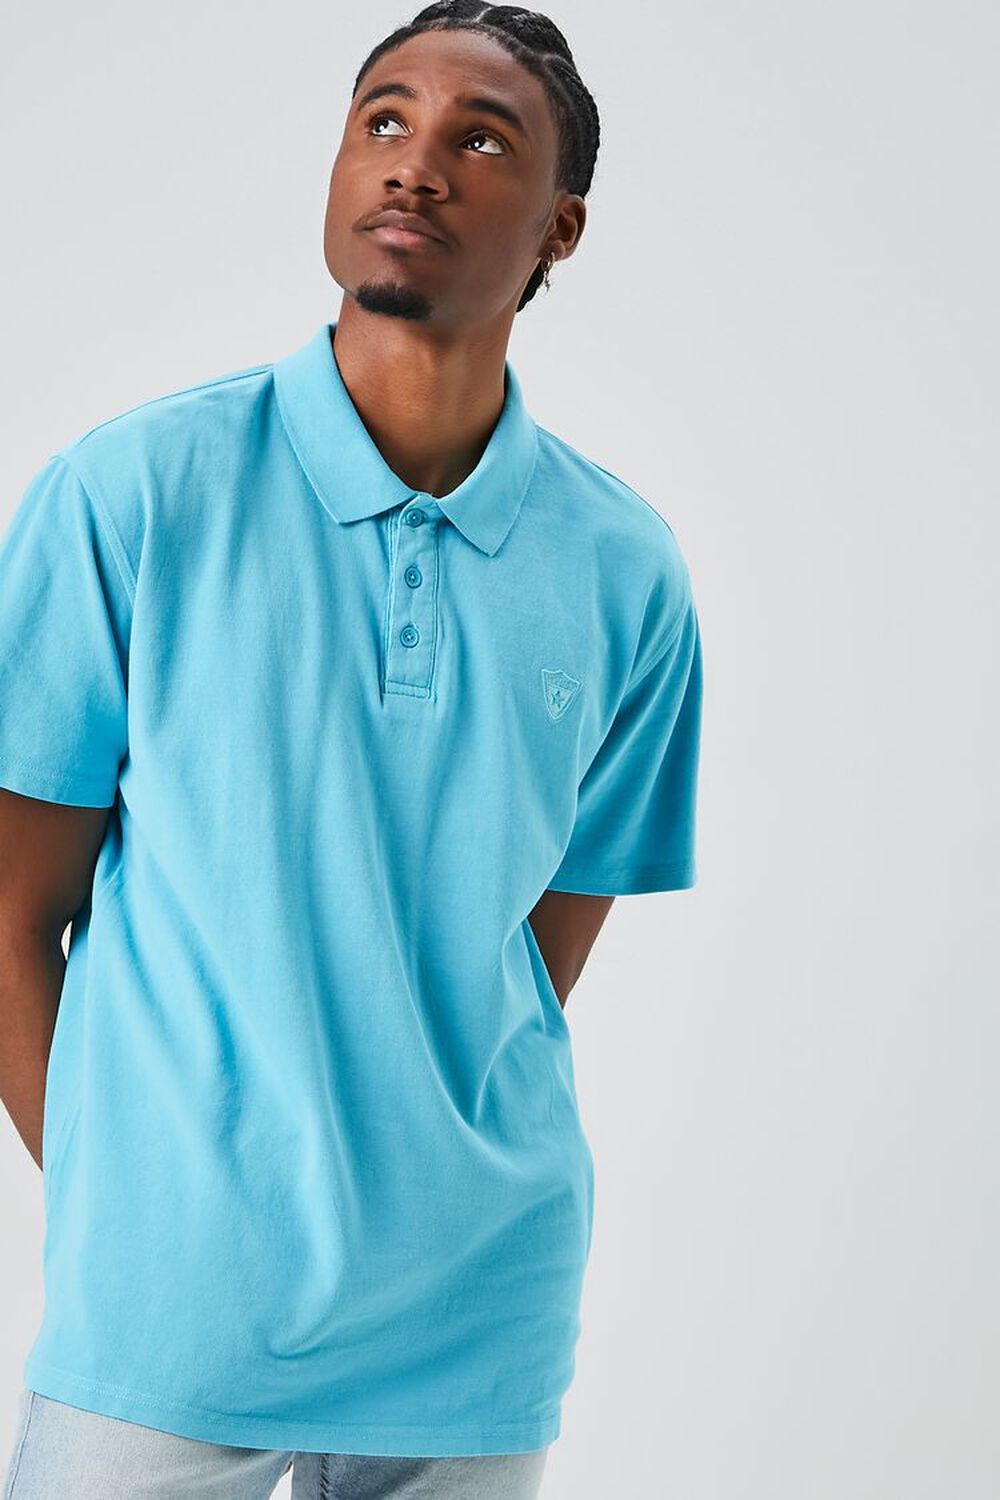 TEAL Embroidered Crest Polo Shirt, image 1